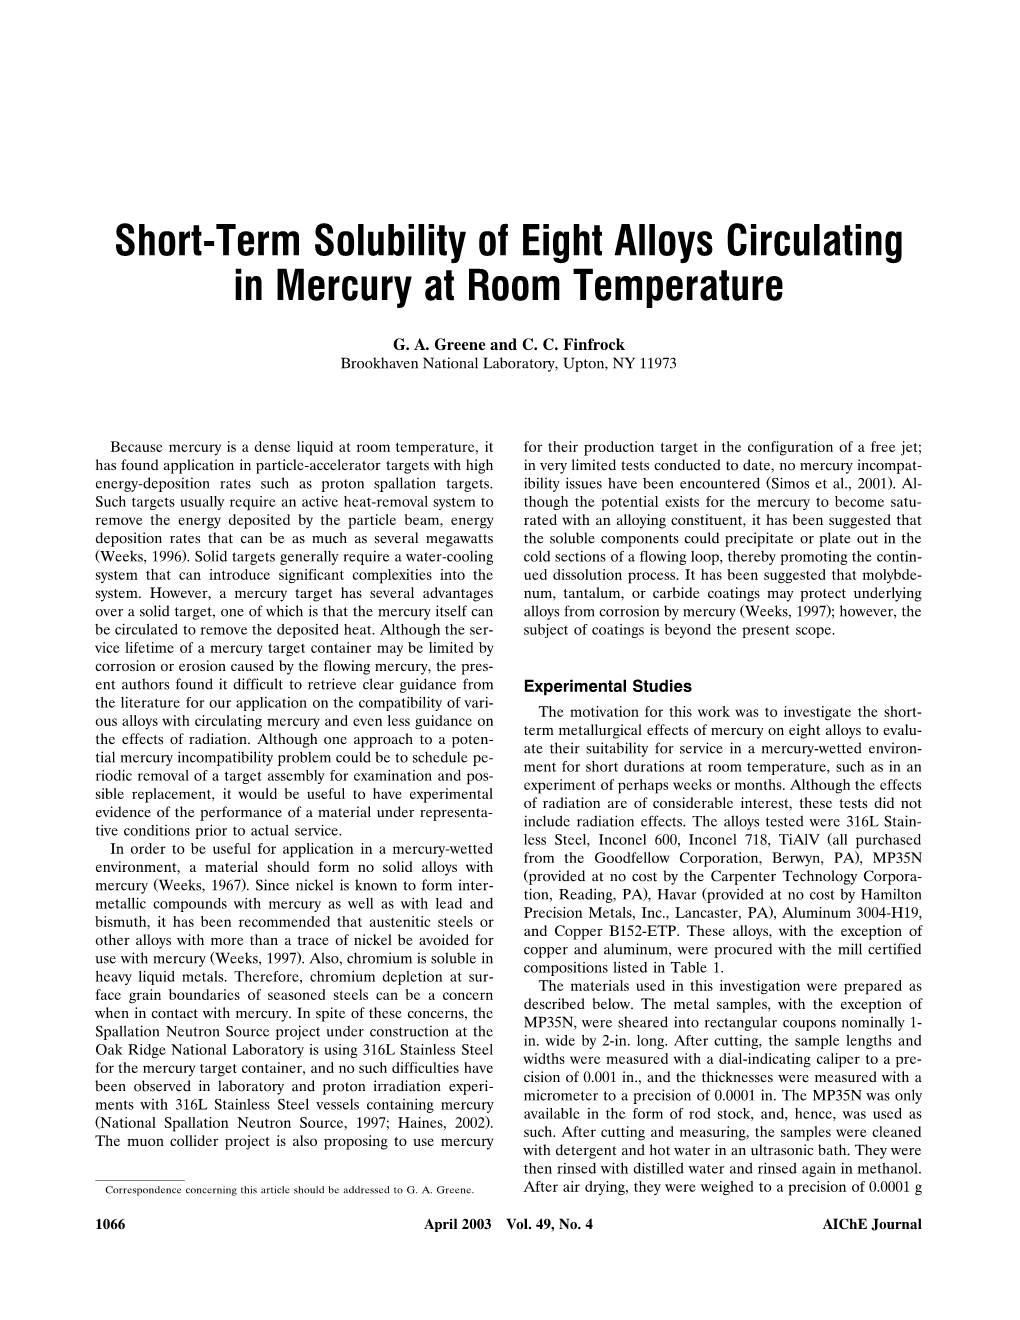 Short-Term Solubility of Eight Alloys Circulating in Mercury at Room Temperature